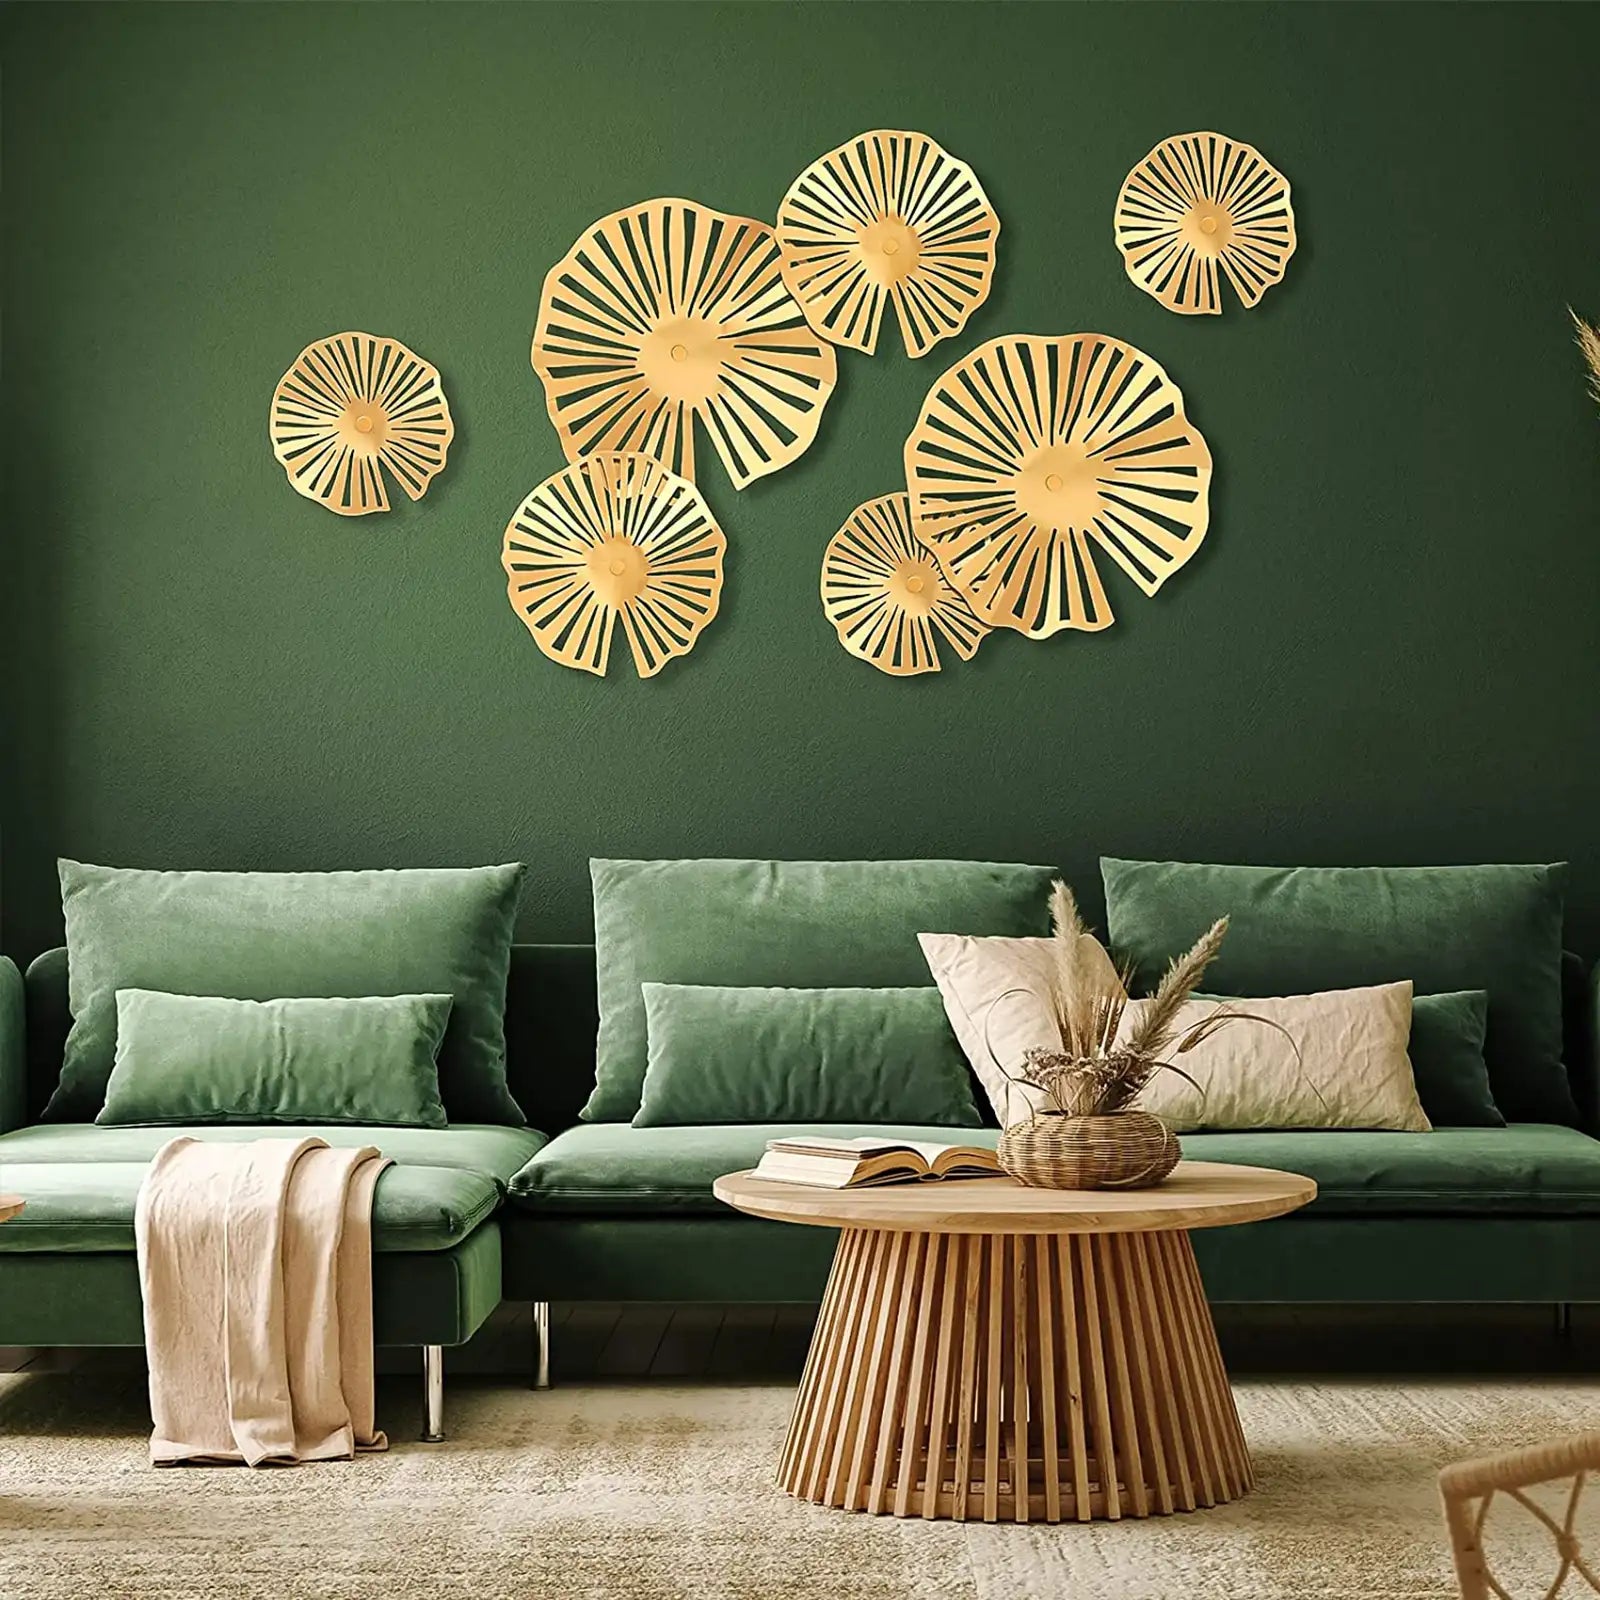 7 Pieces Gold Metal Wall Art Decor 3D Lotus Leaves Floating Wall Sculptures Modern for Living Room Bedroom Hotel Home Decorations, 3 Sizes